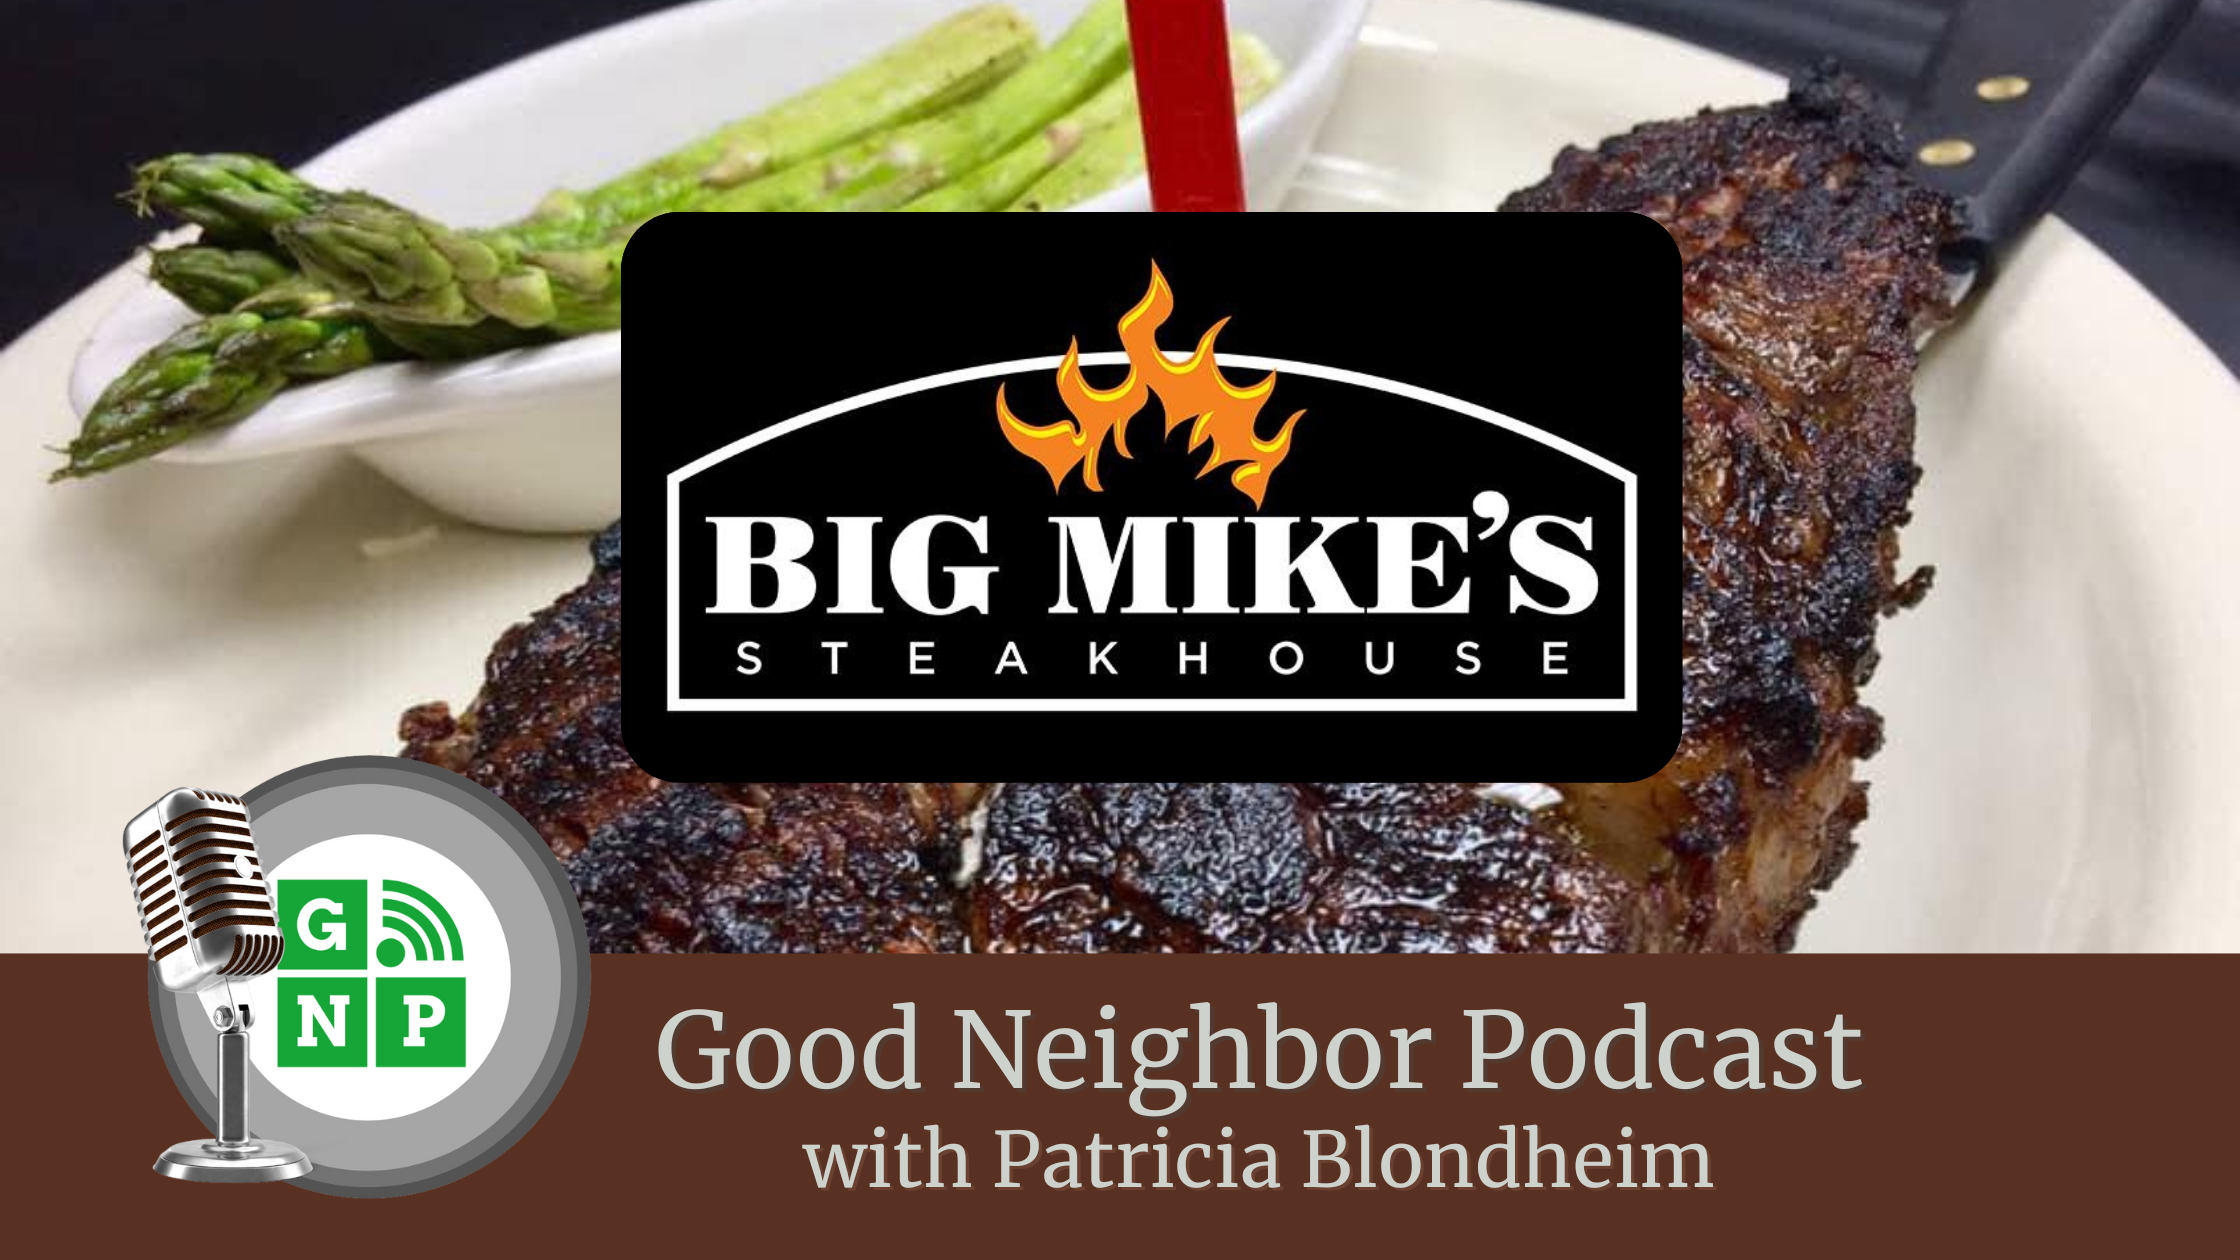 Big Mike's: Mike Cole's Recipe for Success with Steak, Seafood, and Southern Hospitality